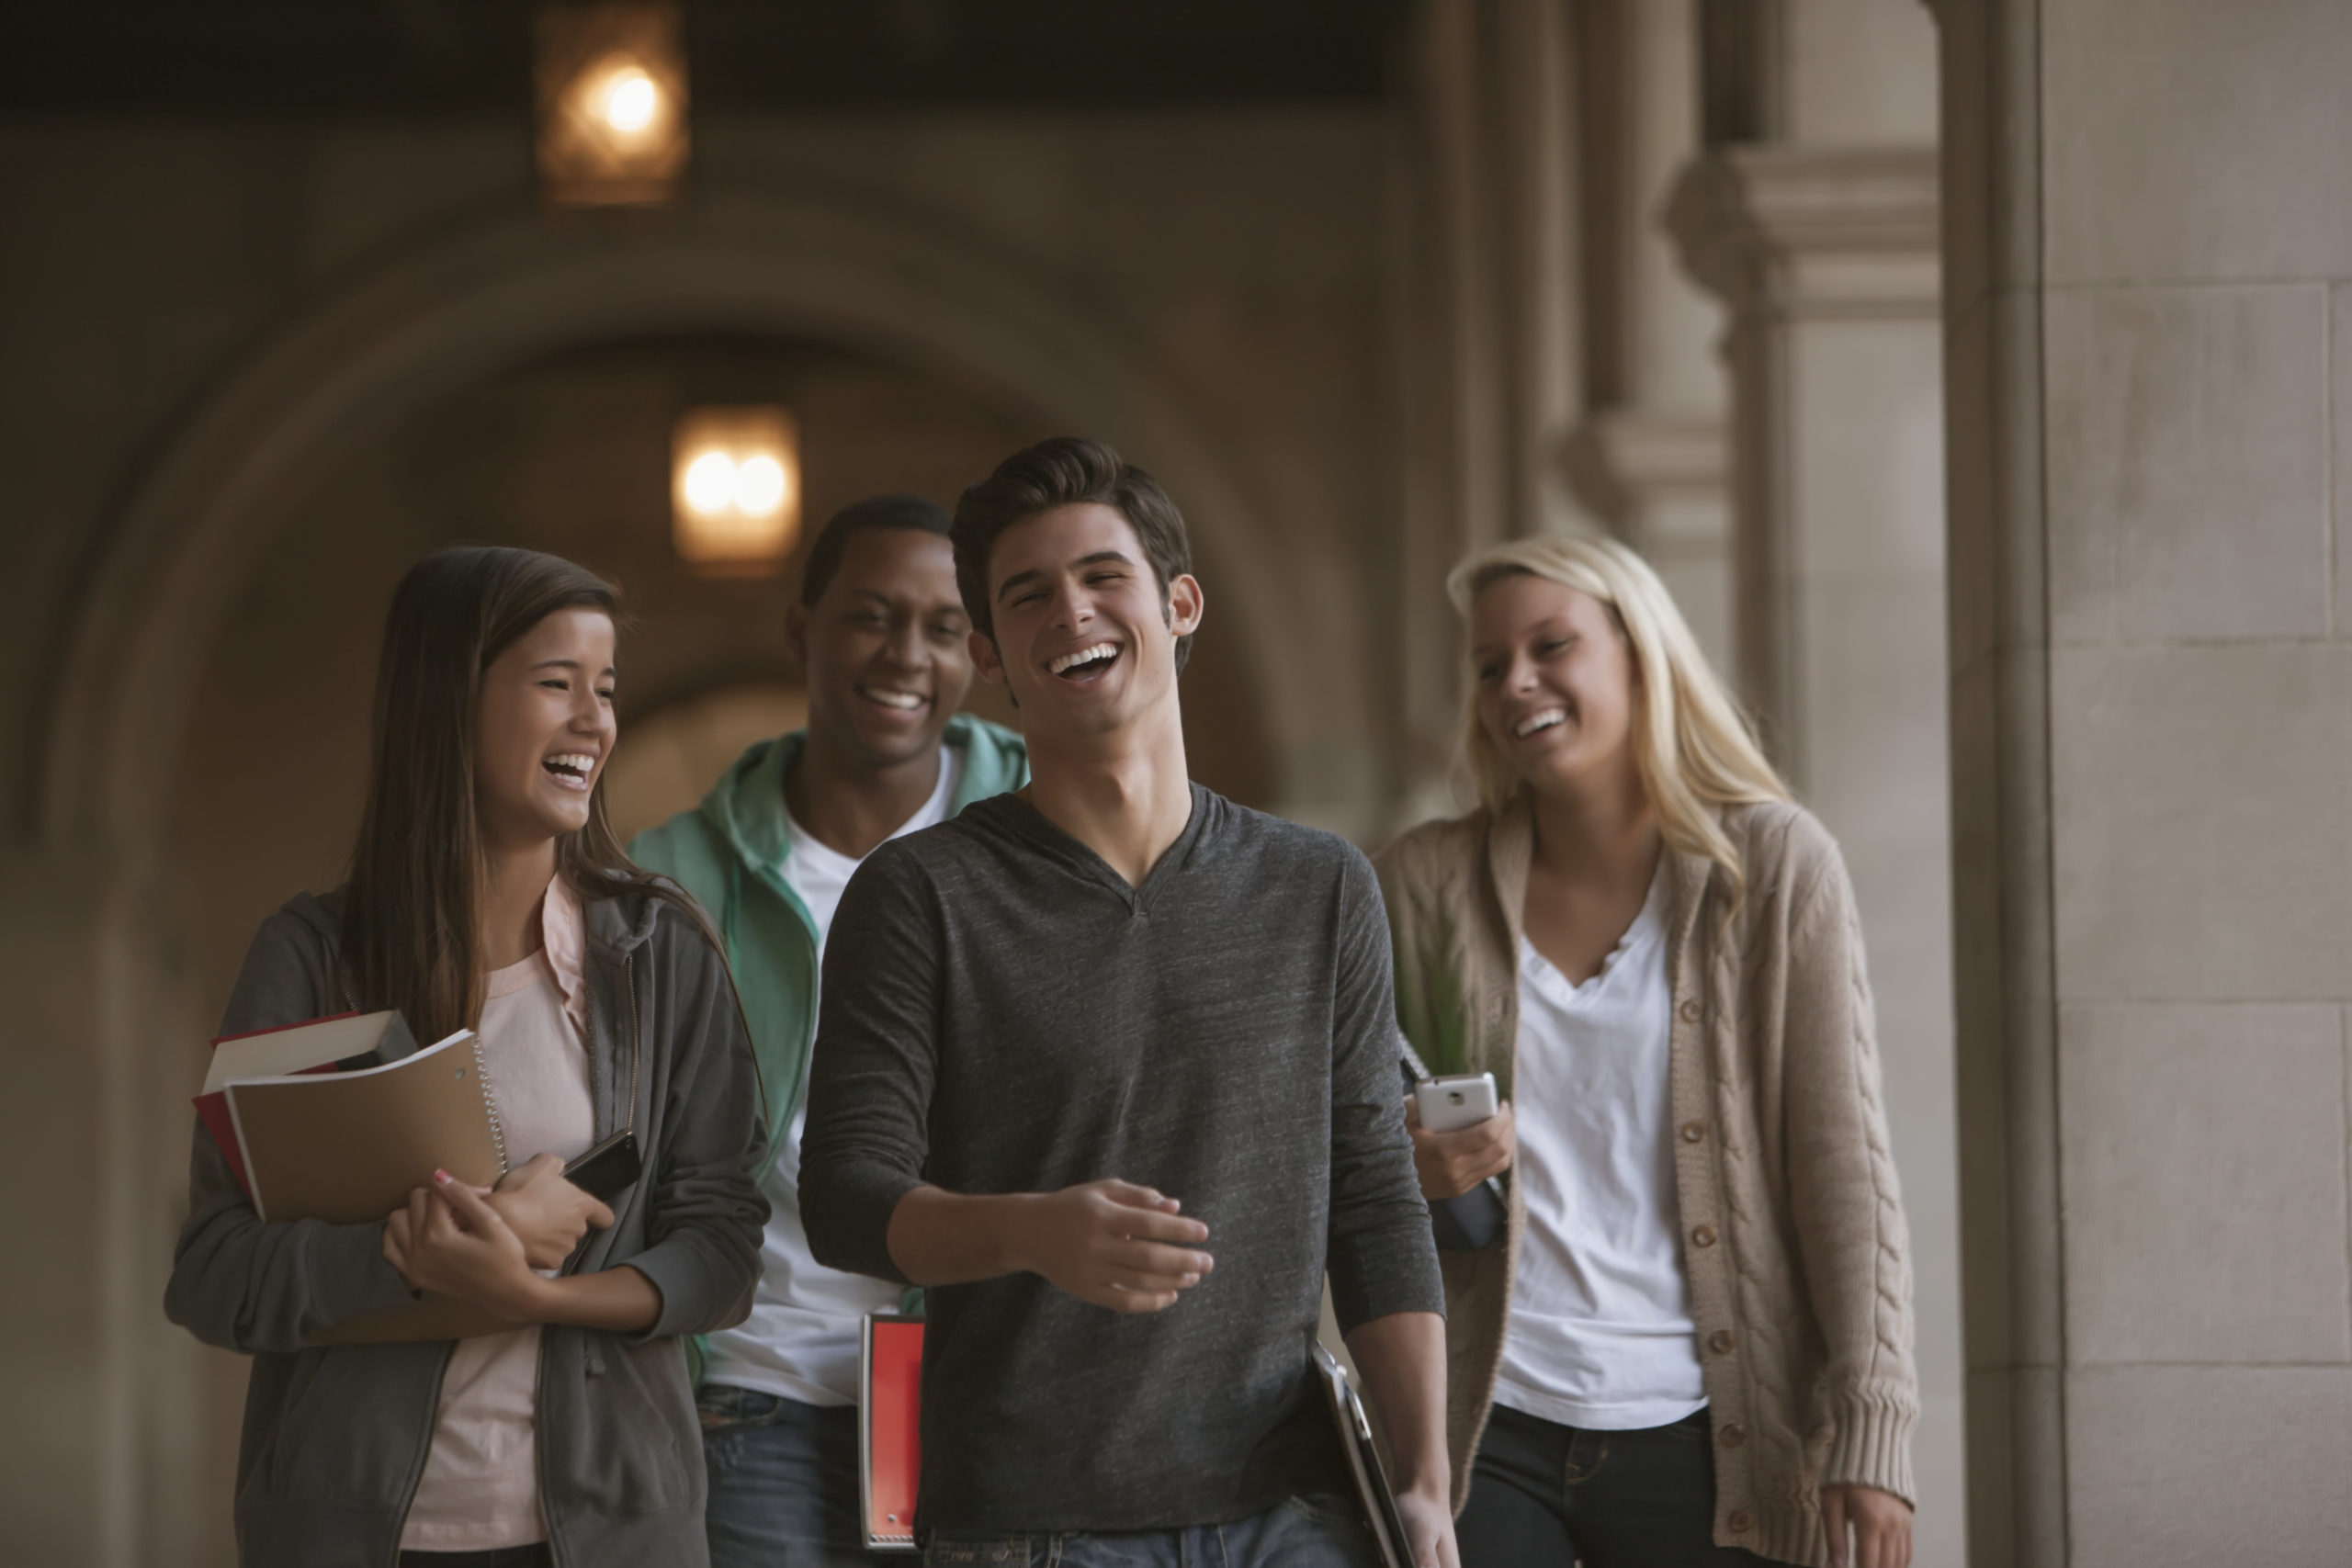 Students walking together on campus